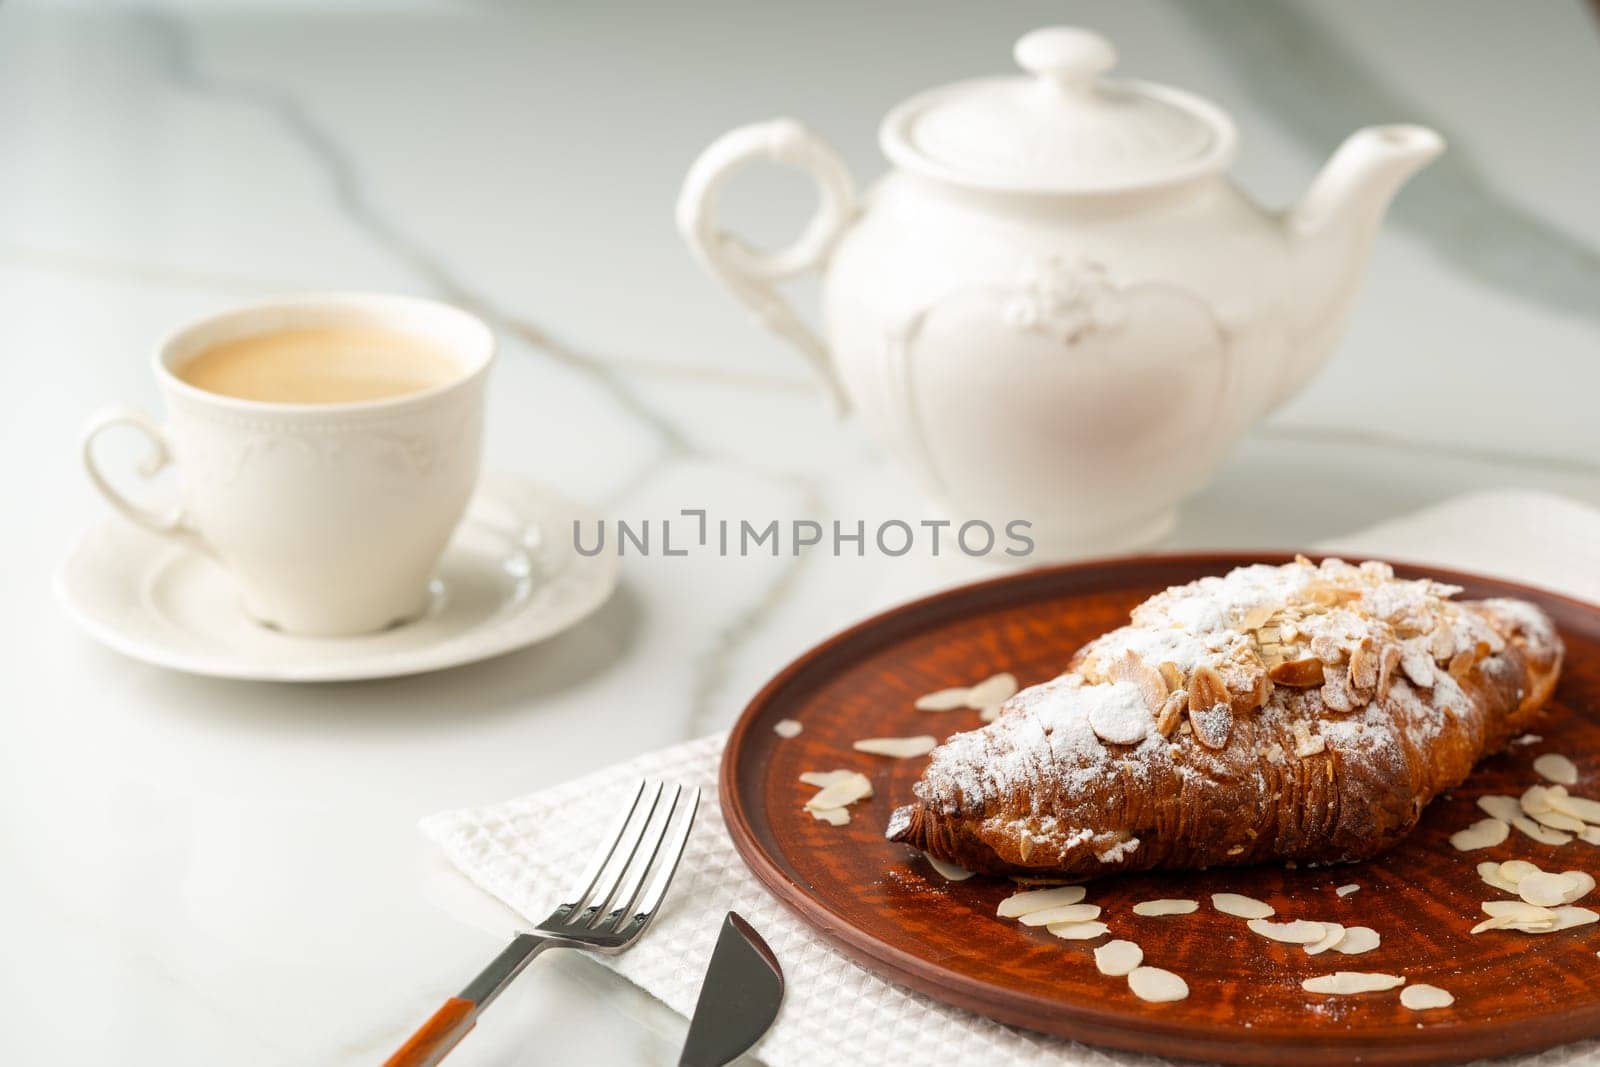 Almond Croissant on clay plate close up by Fabrikasimf